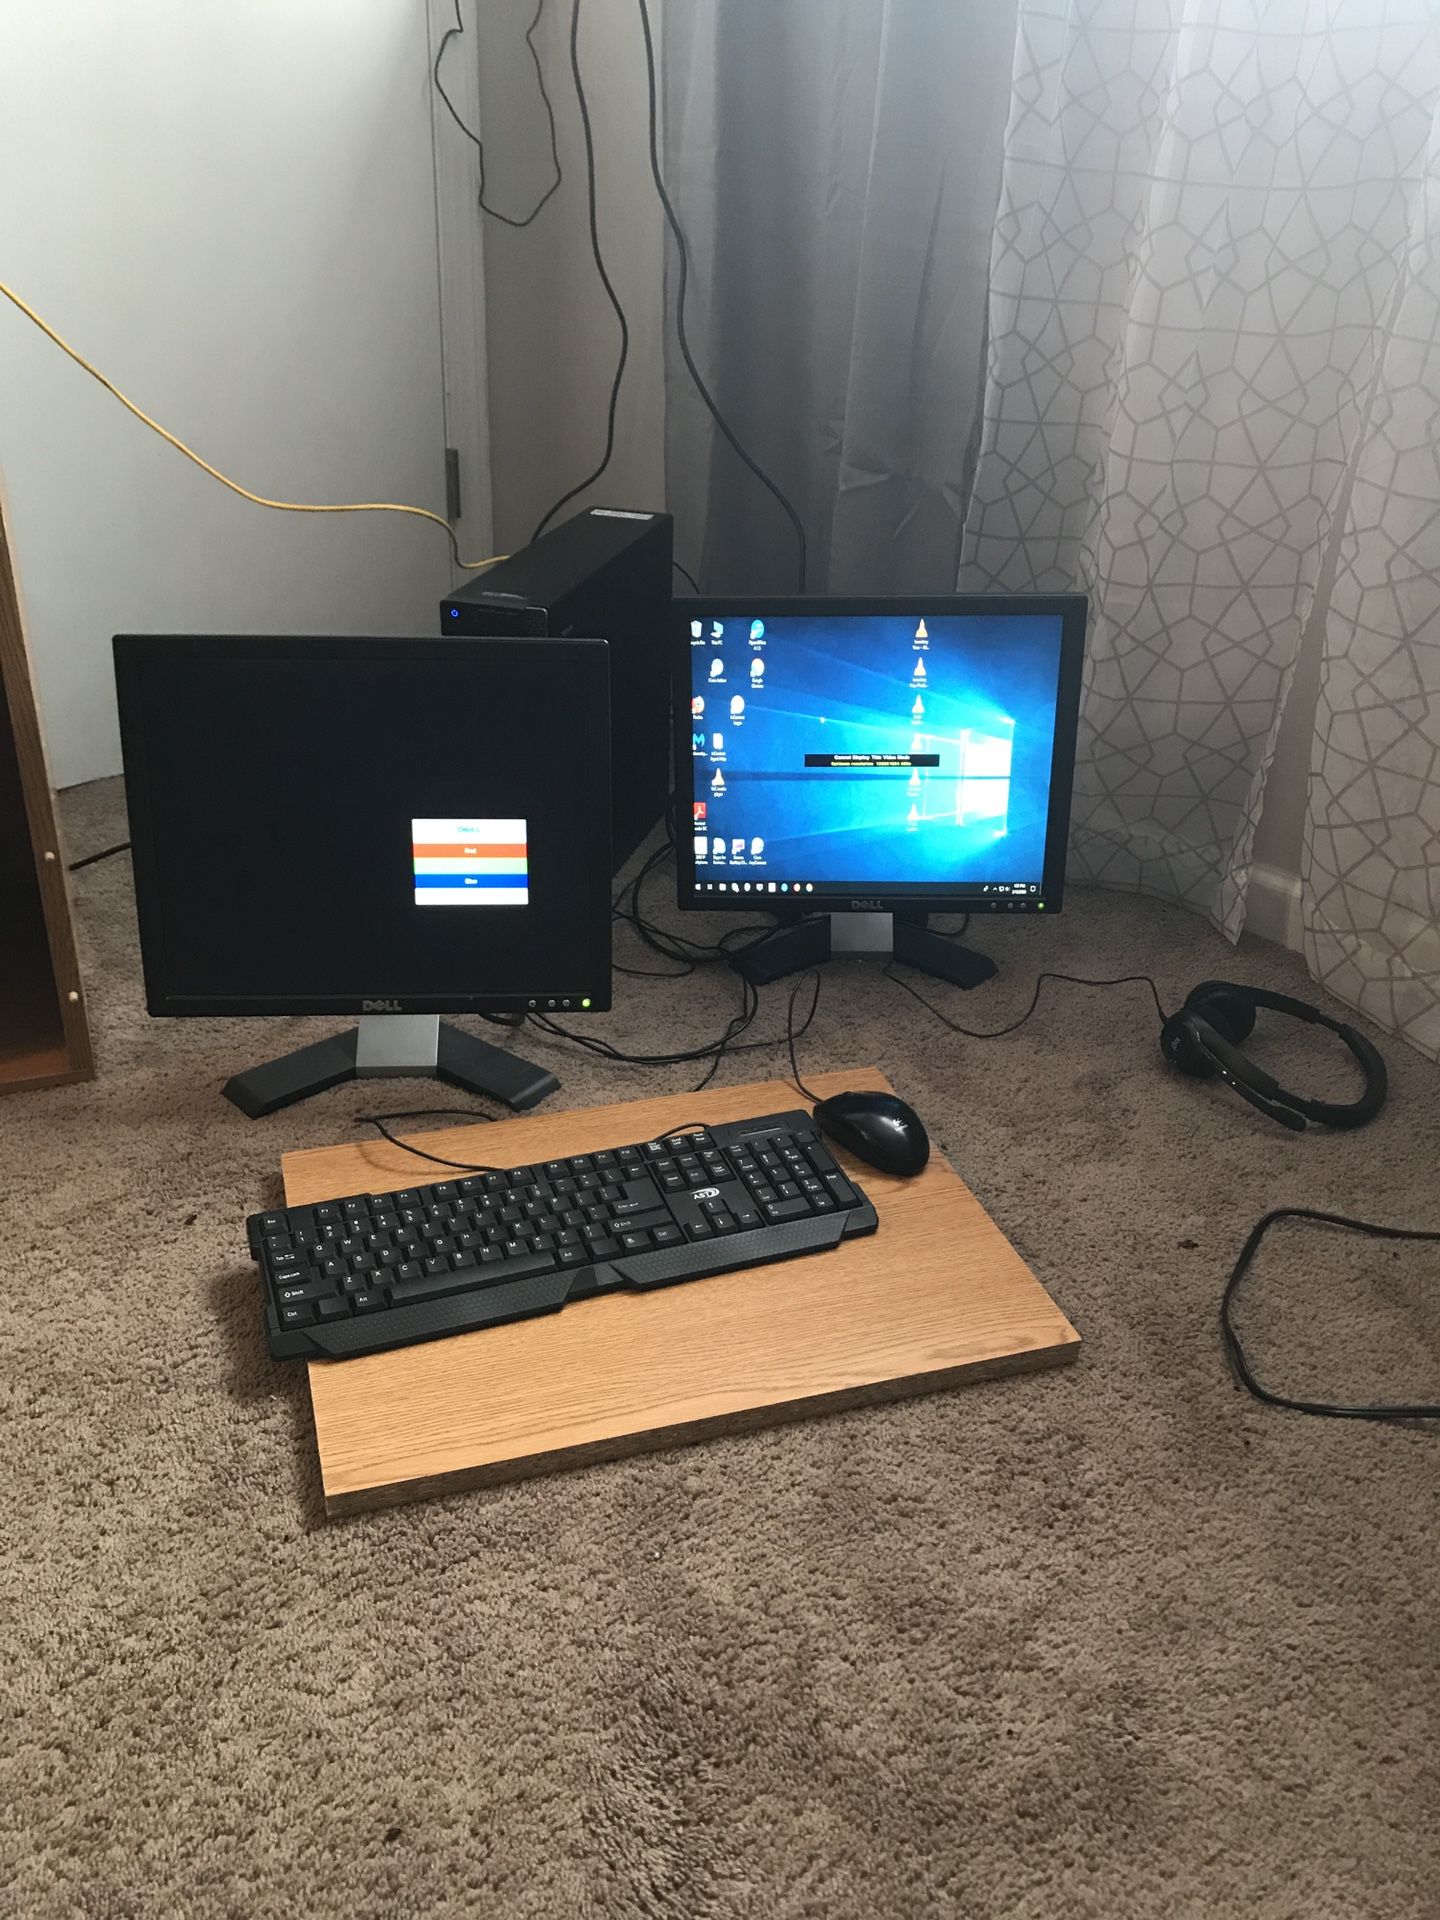 Windows 10* Dell computer W double monitors + mouse + keyboard